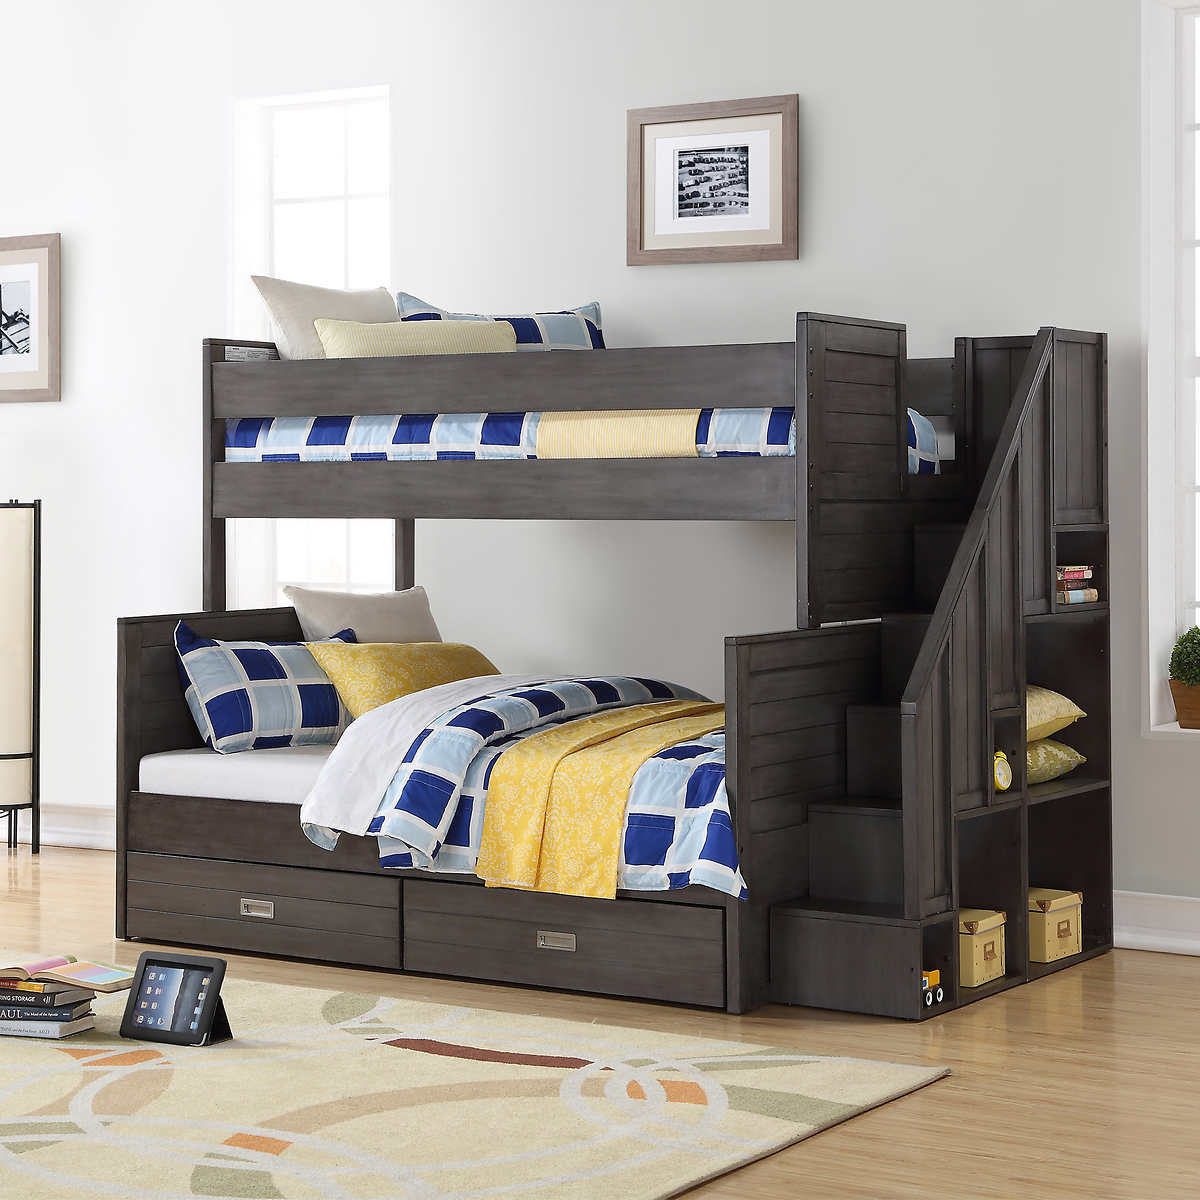 Dylan Twin Over Double Bunk Bed Costco, Cool Double Bunk Beds